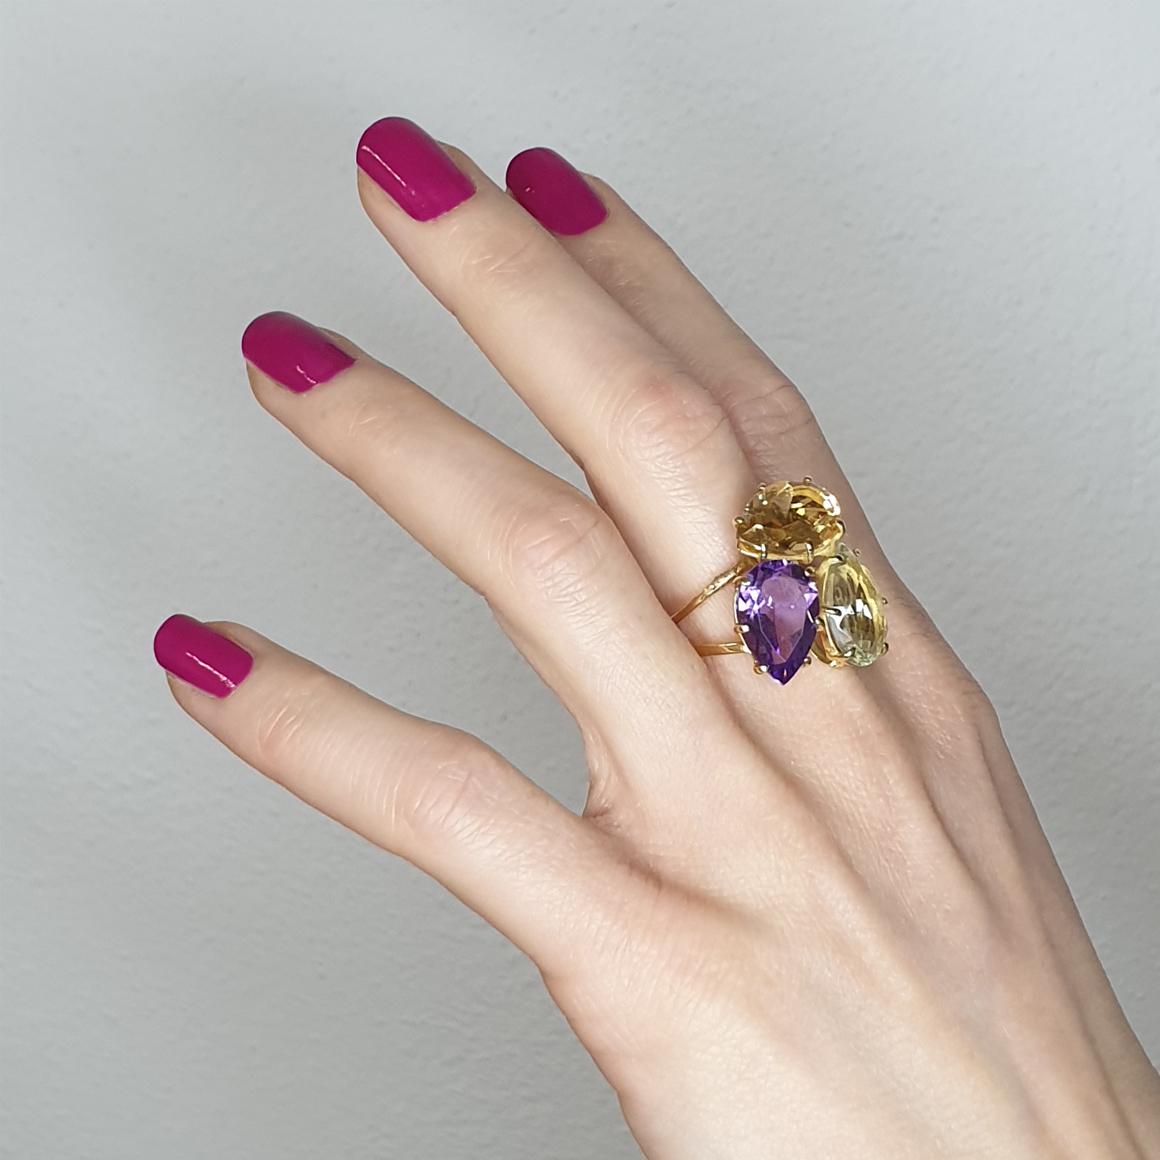 Intertwining of the same shapes with different colors create a very trendy Ring, Italian art jewels by Stanoppi Jewellery since 1948.

Ring in 18k rose gold with Amethyst (drop cut, size: 10x15 mm), Citrine (drop cut, size: 10x15mm) and Prasiolite